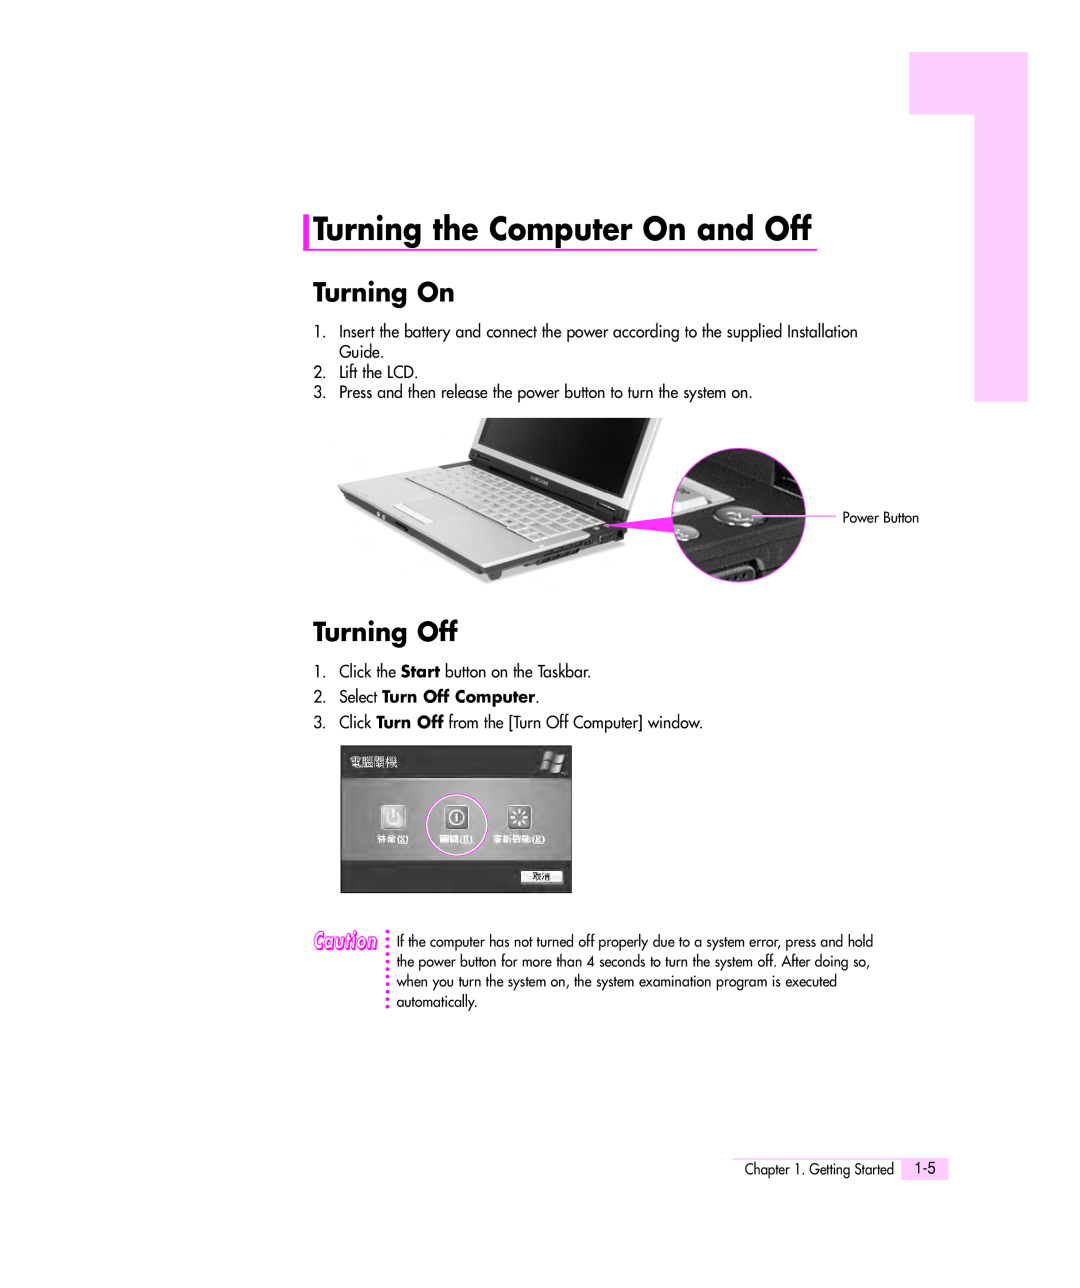 Samsung Q35 manual Turning the Computer On and Off, Turning On, Turning Off, Select Turn Off Computer 